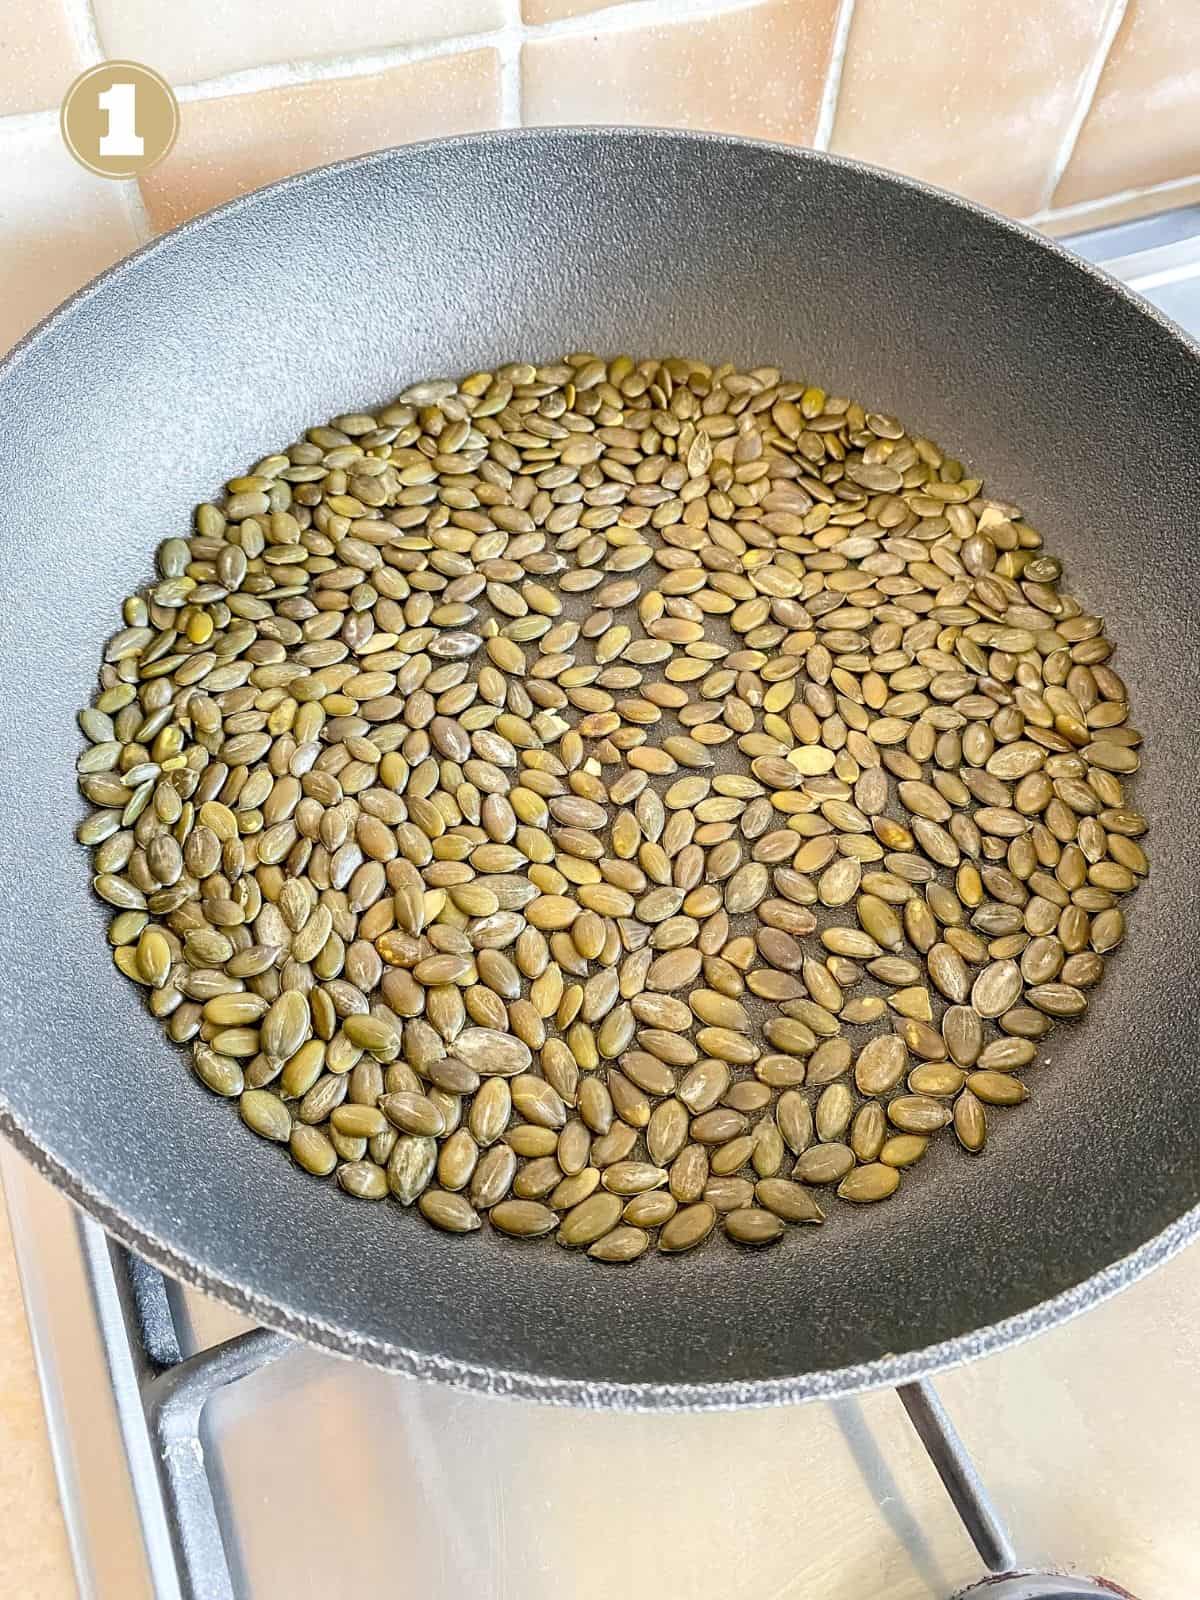 pumpkin seeds in a frying pan labelled number one.